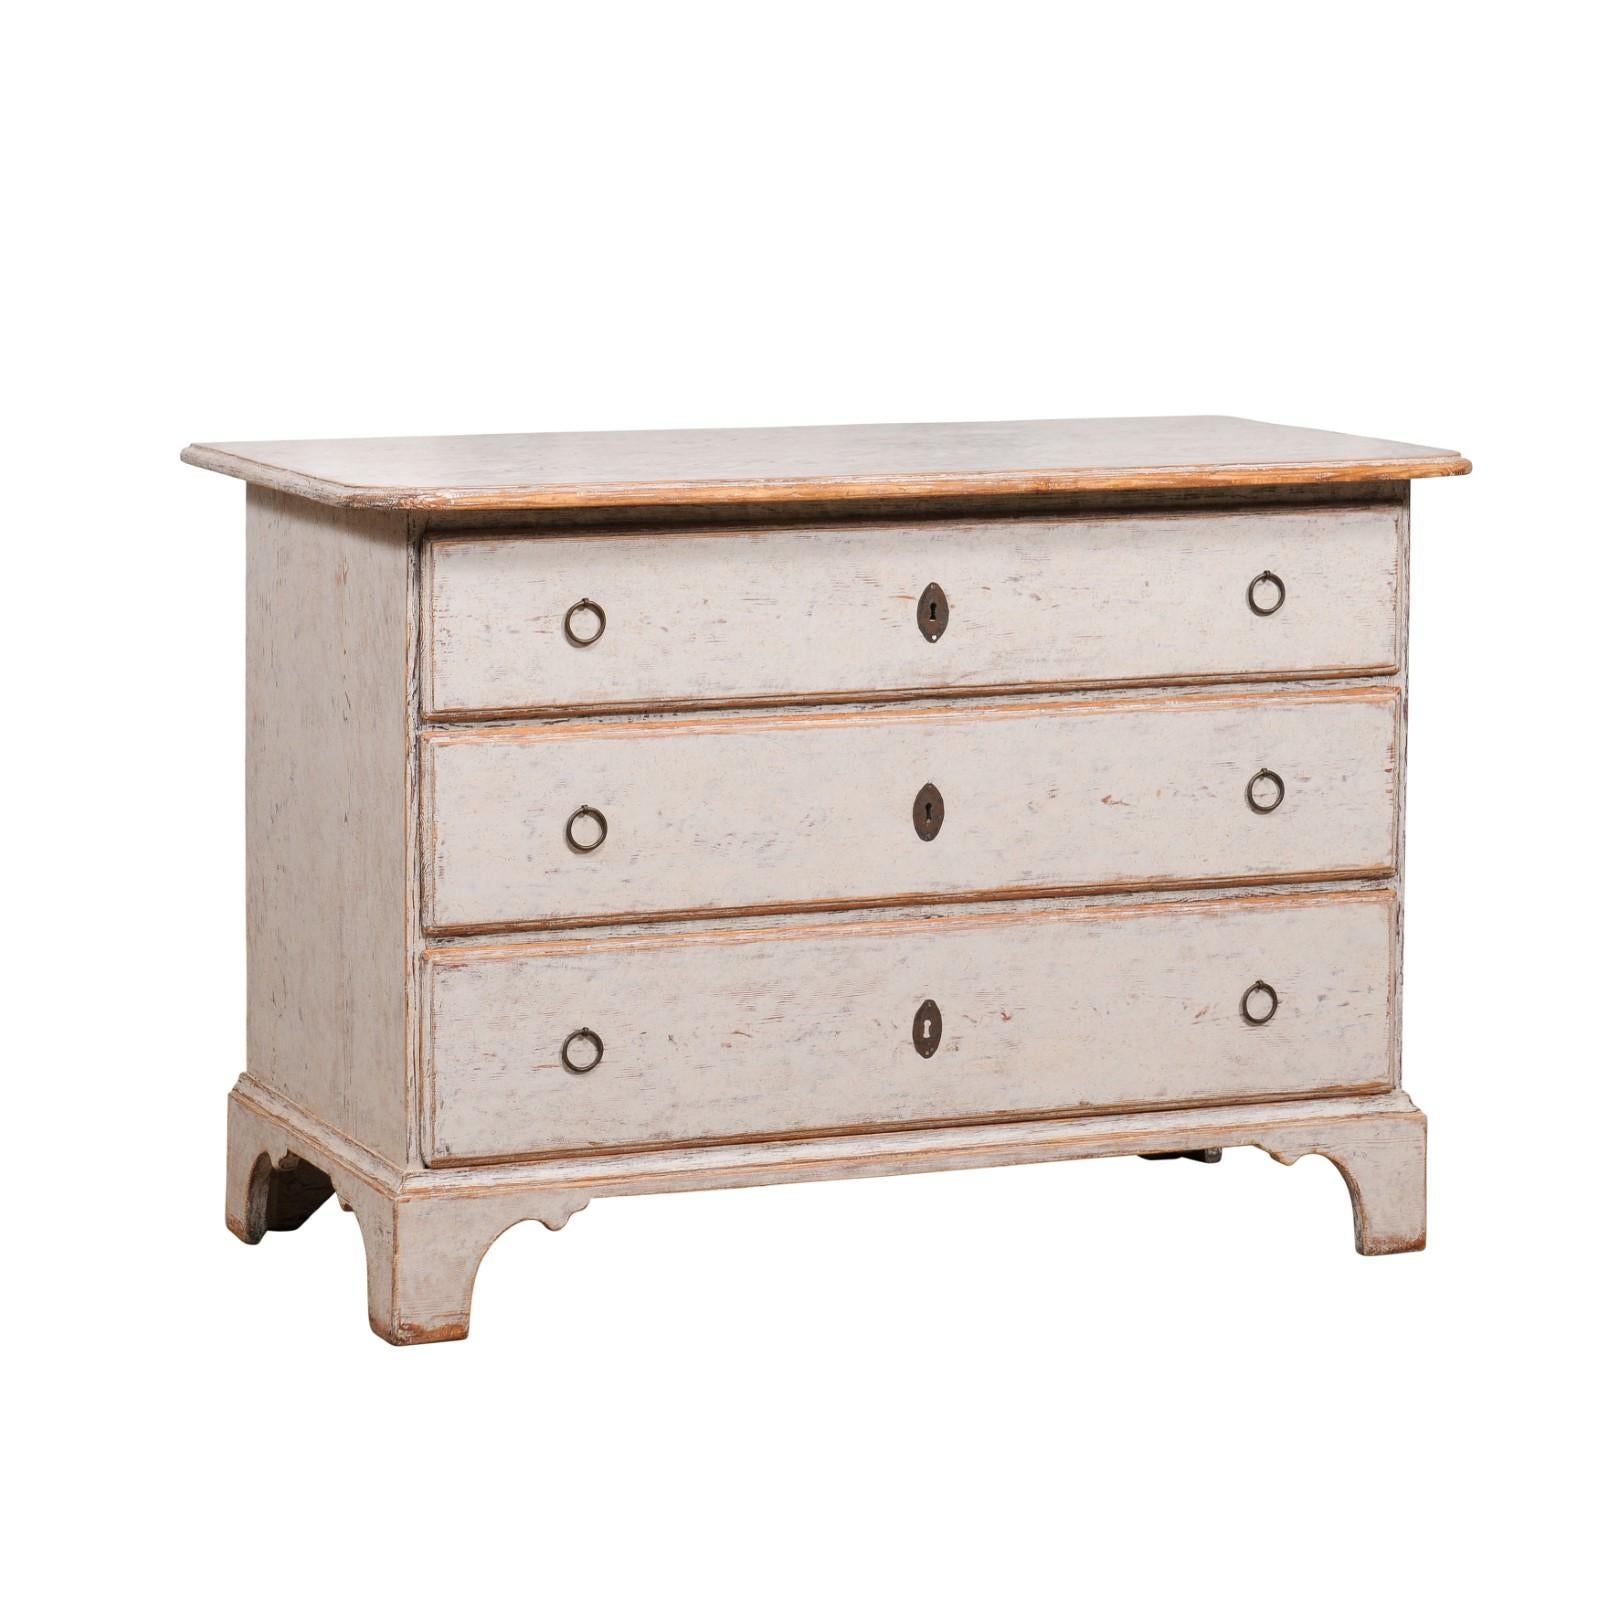 A Swedish light gray painted chest from circa 1780 with three drawers and carved bracket feet. Captivating in its understated elegance, this Swedish Chest from circa 1780 offers a seamless blend of functionality and style. Swathed in a light gray